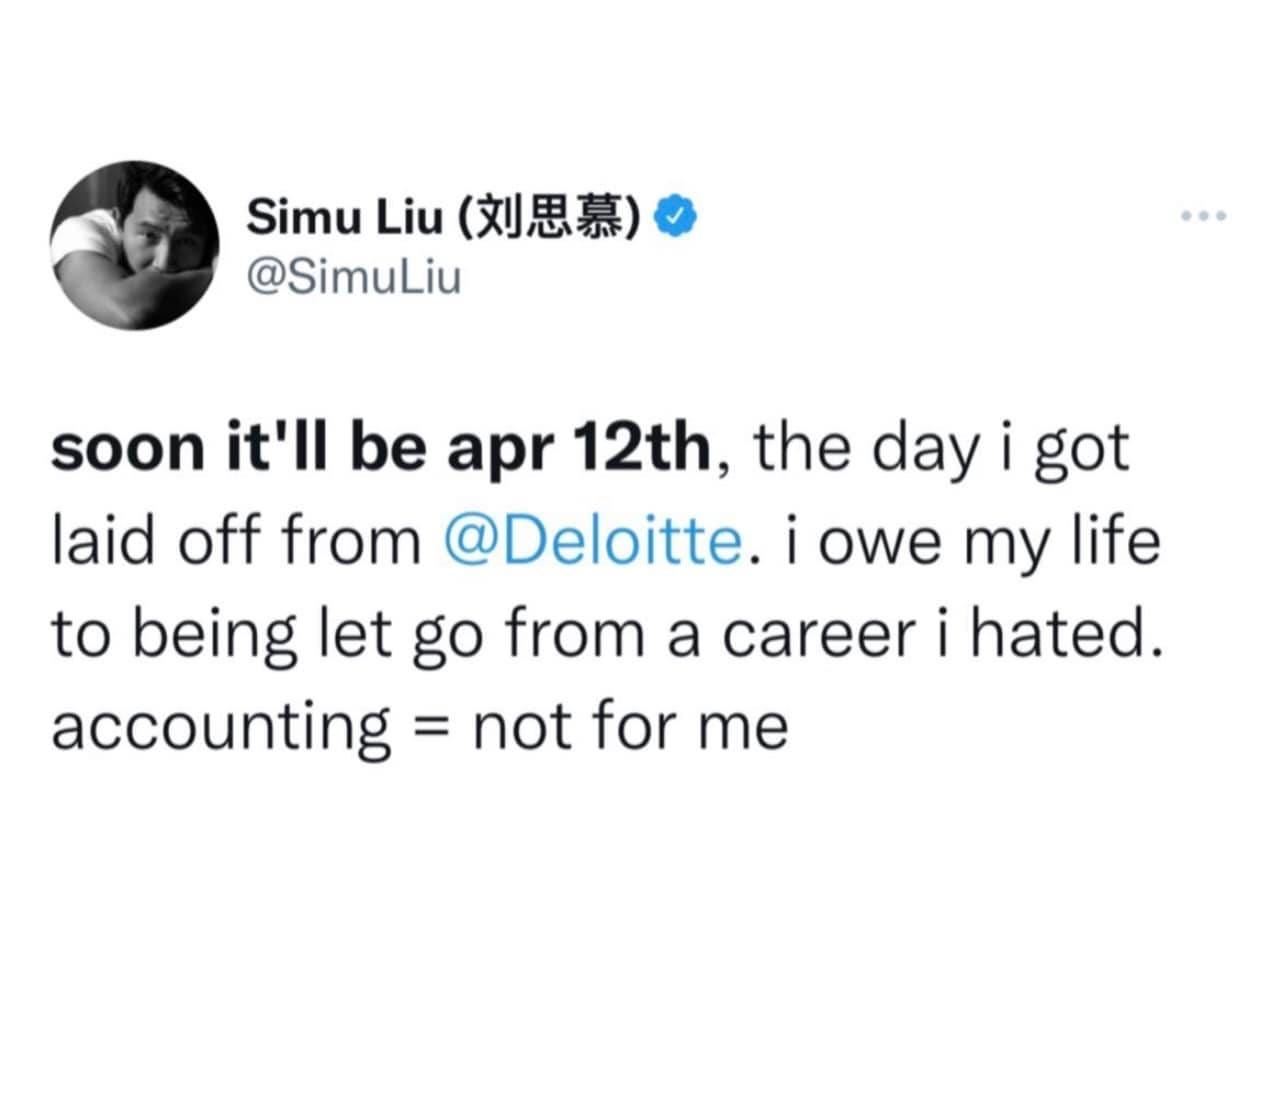 May be an image of text that says 'Simu Liu （刘思慕） @SimuLiu soon it'll be apr 12th, the day i got laid off from @Deloitte. i owe my life to being let go from a career i hated. accounting not for me'